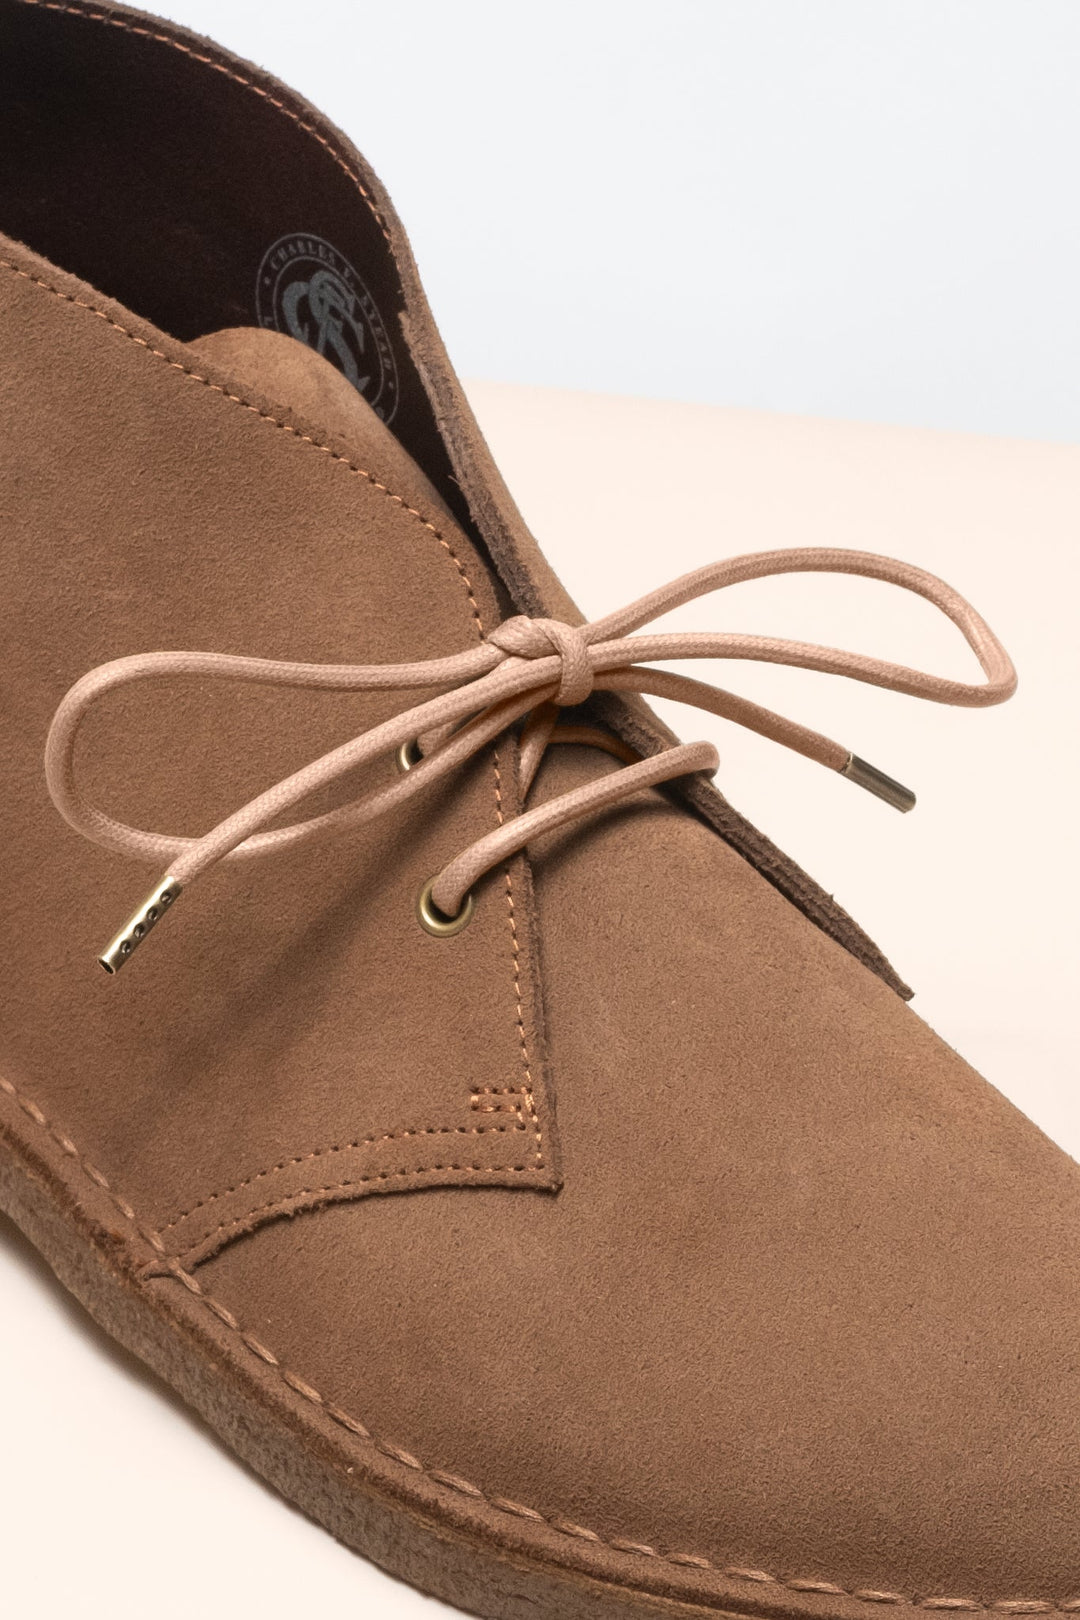 Taupe - 4mm round waxed shoelaces for boots and shoes made from 100% organic cotton - Senkels